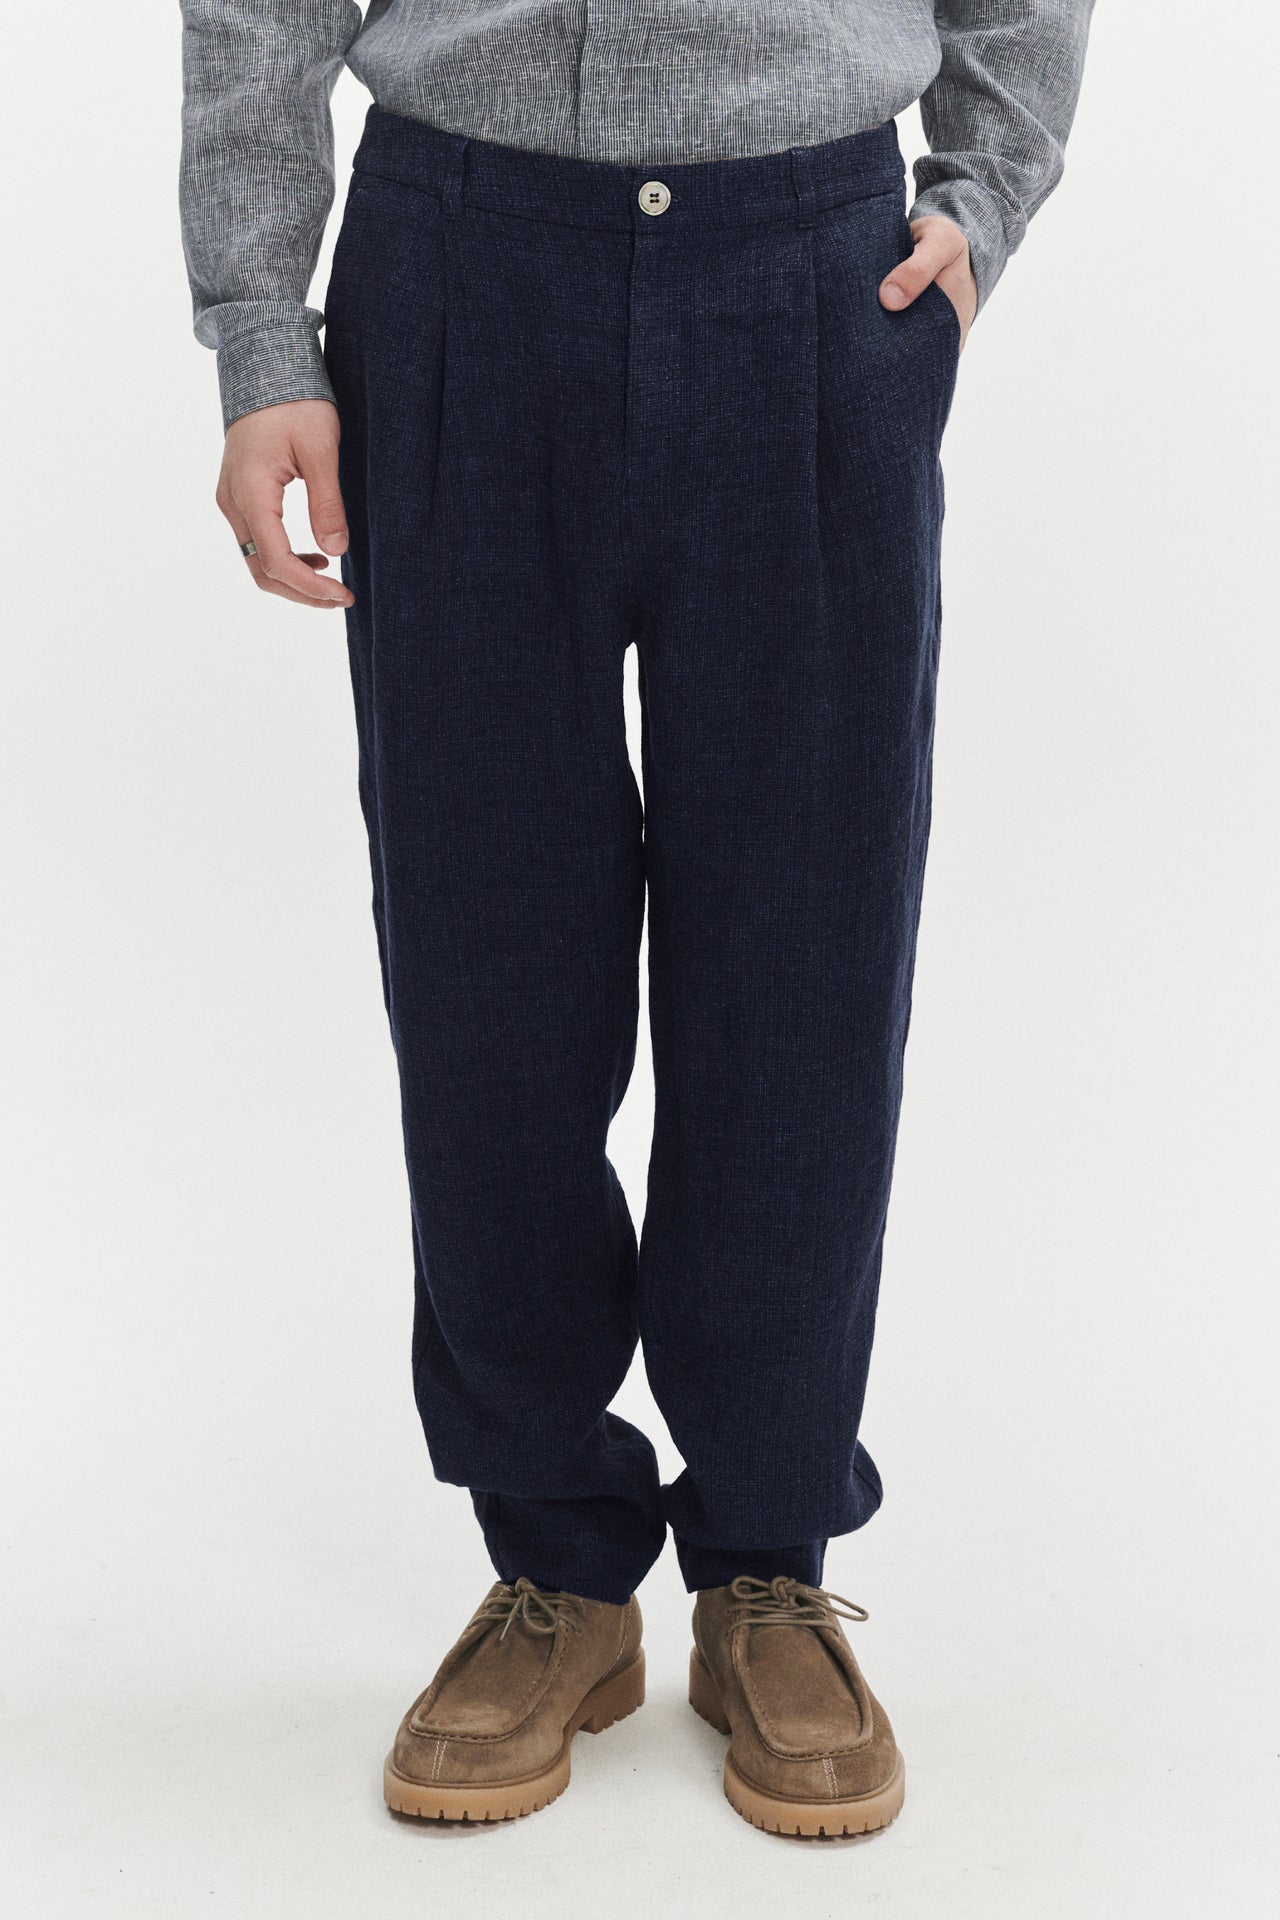 Genuine Trousers in a Navy Fluid and Structured Italian Linen Crepe